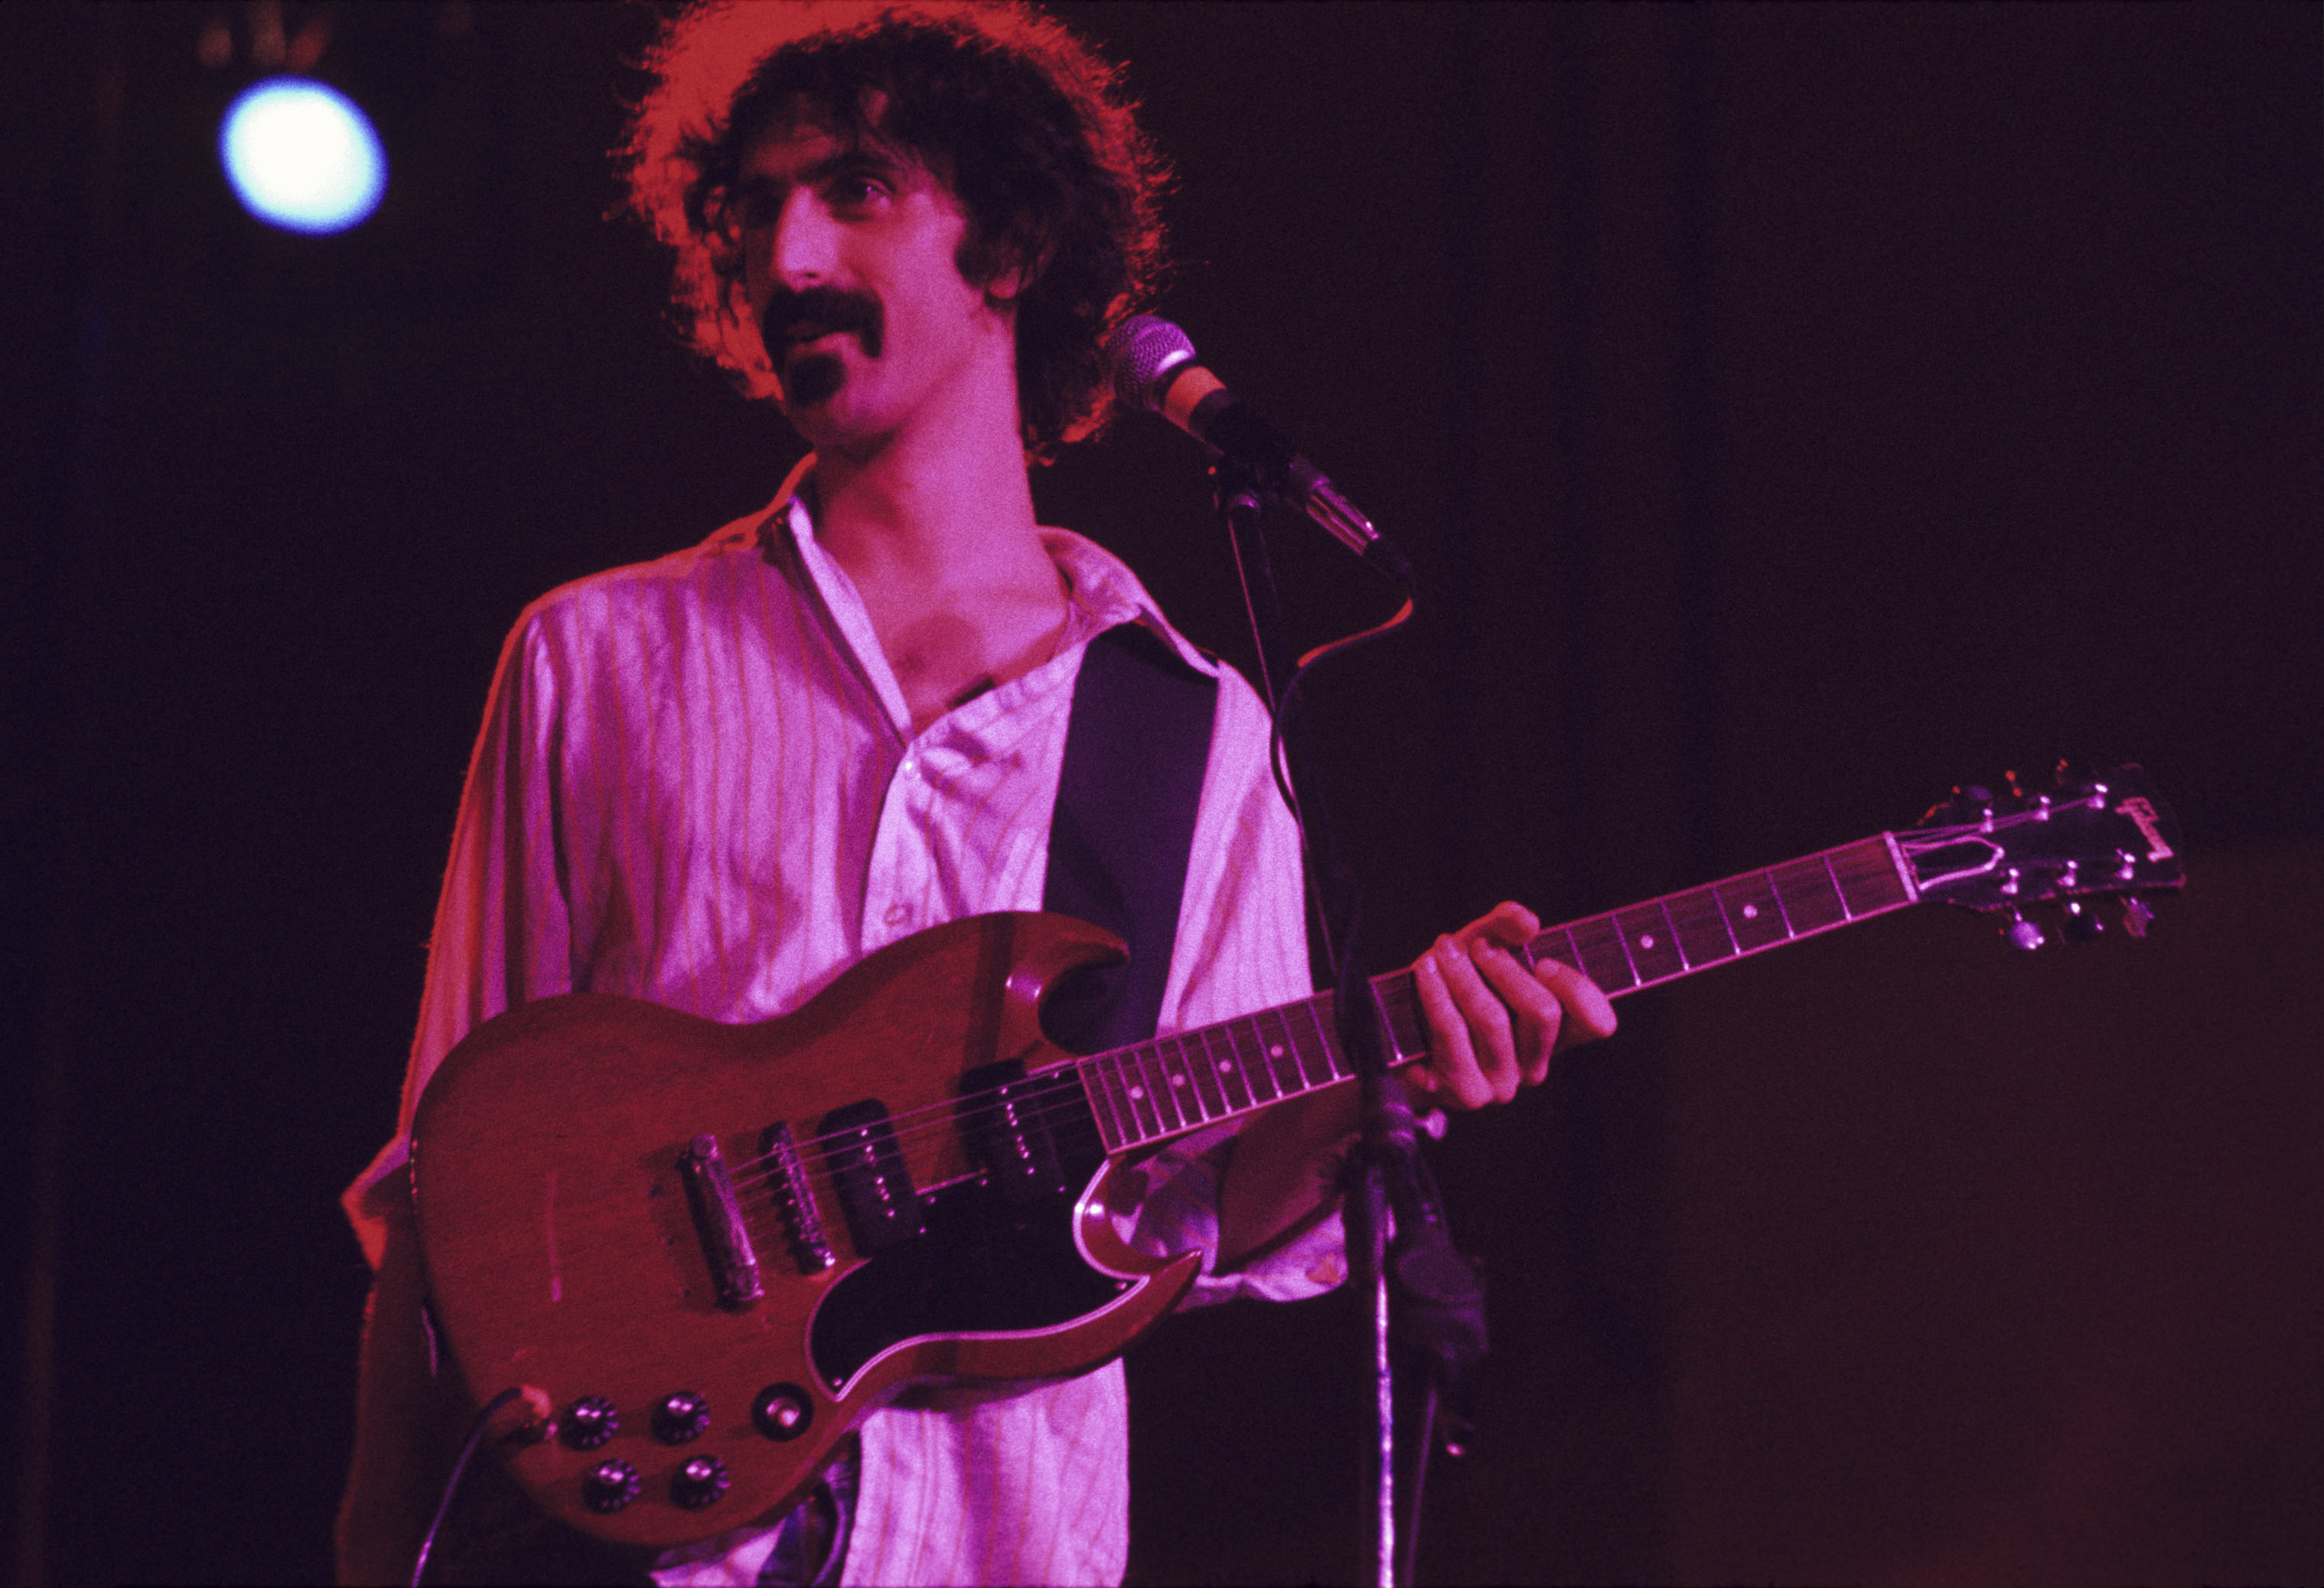 Frank Zappa performs at the University of Georgia Coliseum on March 15, 1973 in Athens, Georgia. (Tom Hill—WireImage)